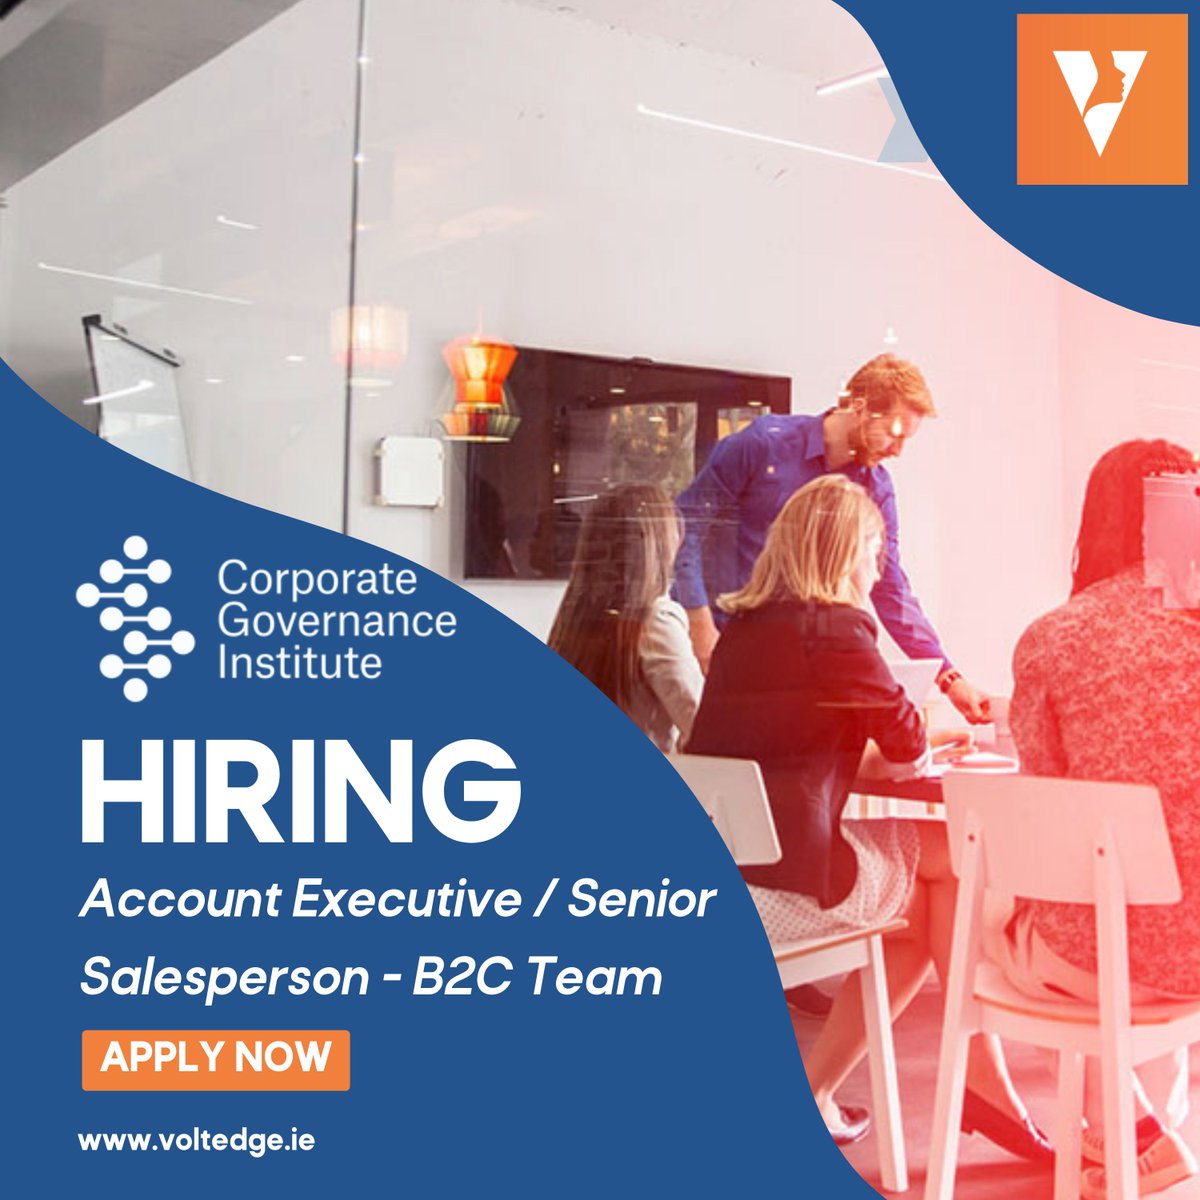 Exciting Opportunity for a B2C Account Executive / Senior Salesperson with @CorpGovInst. Apply now and join the global team at The Corporate Governance in shaping the future through #education.

voltedge.hirehive.com/account-execut…

#hiring #B2C #AccountExecutive